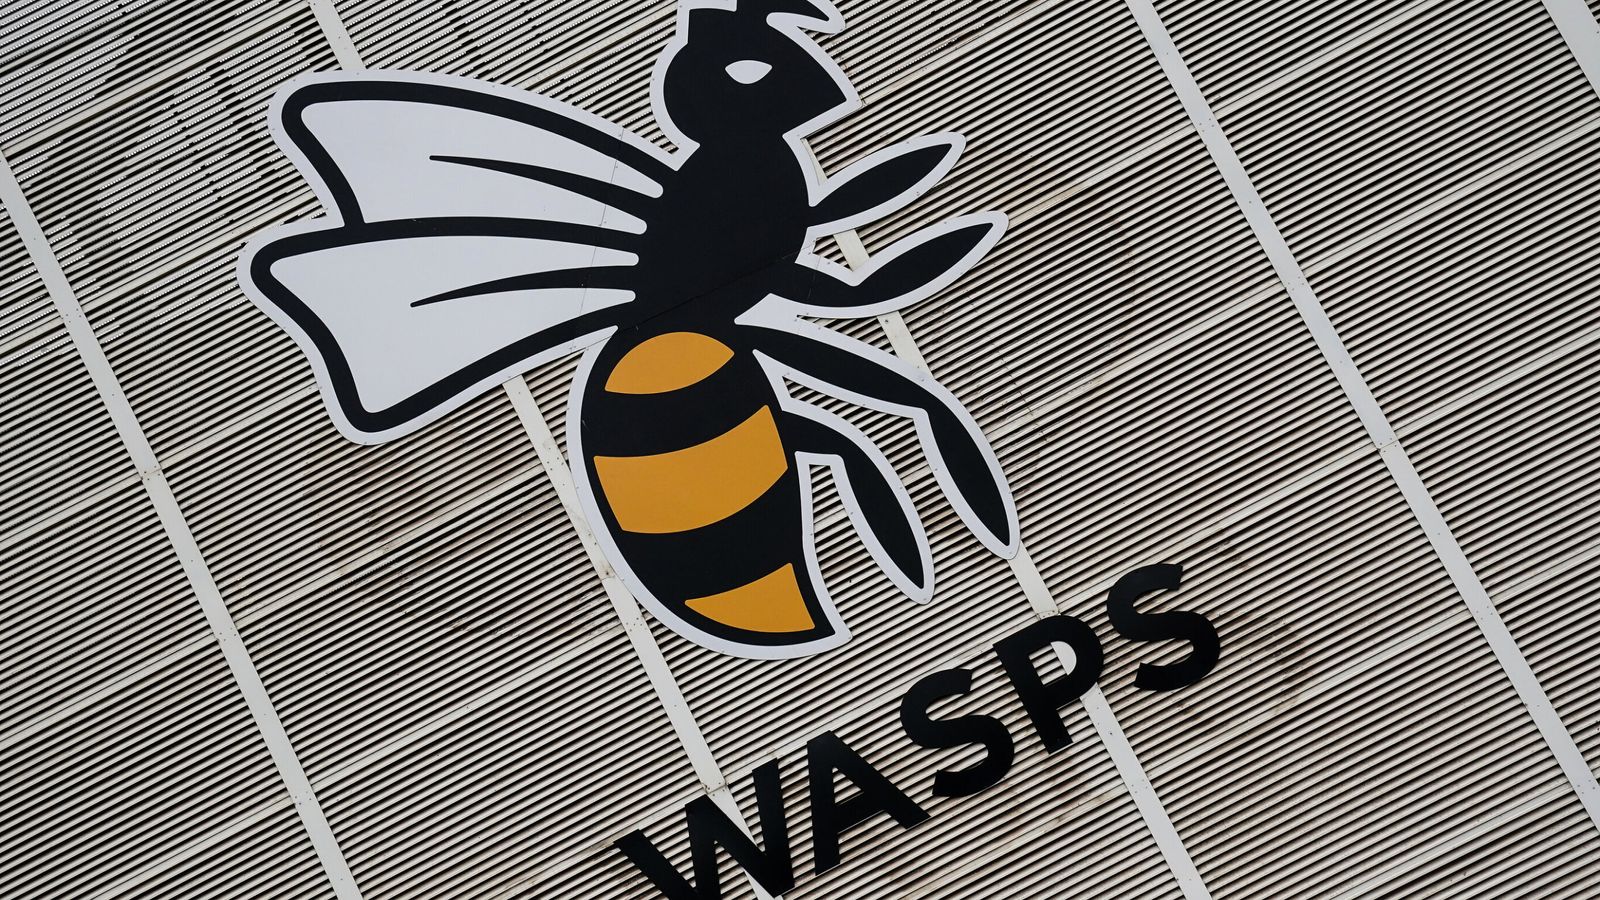 Wasps rugby club likely to 'enter administration in coming days'